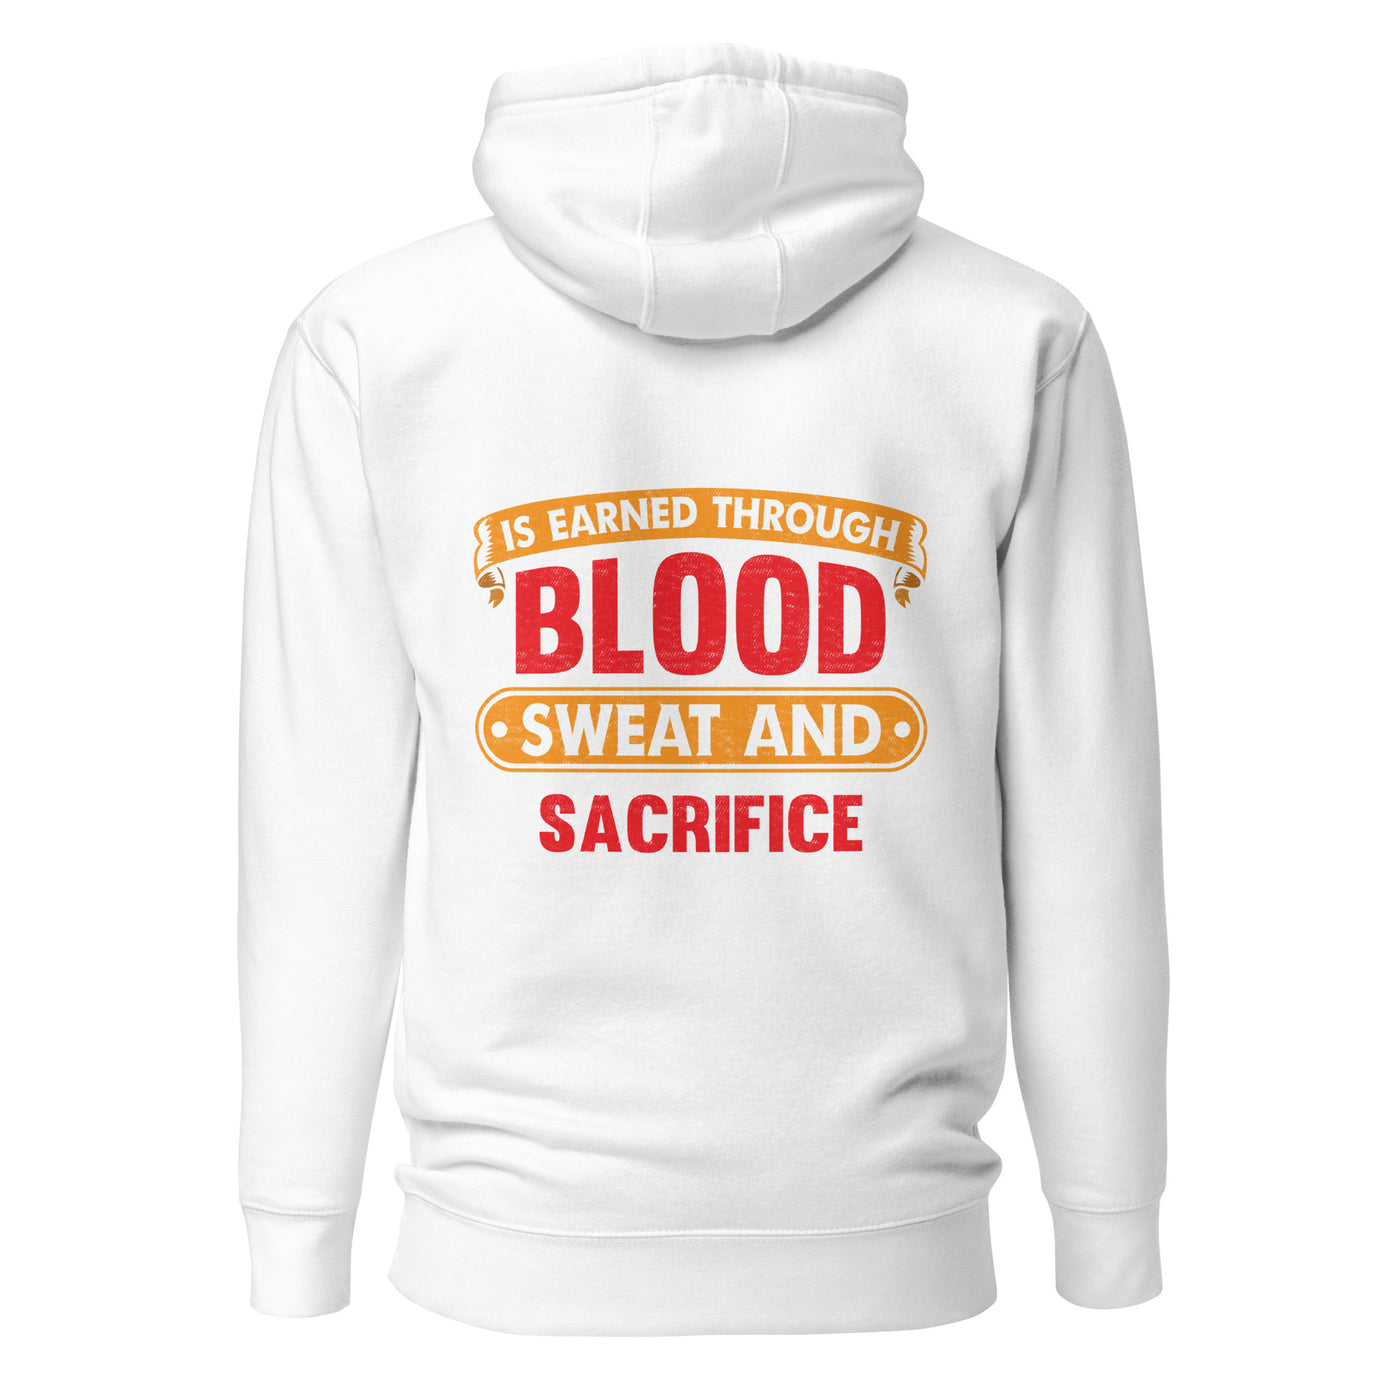 Freedom is earned through Blood, Sweat and Sacrifice - Unisex Hoodie (back print)